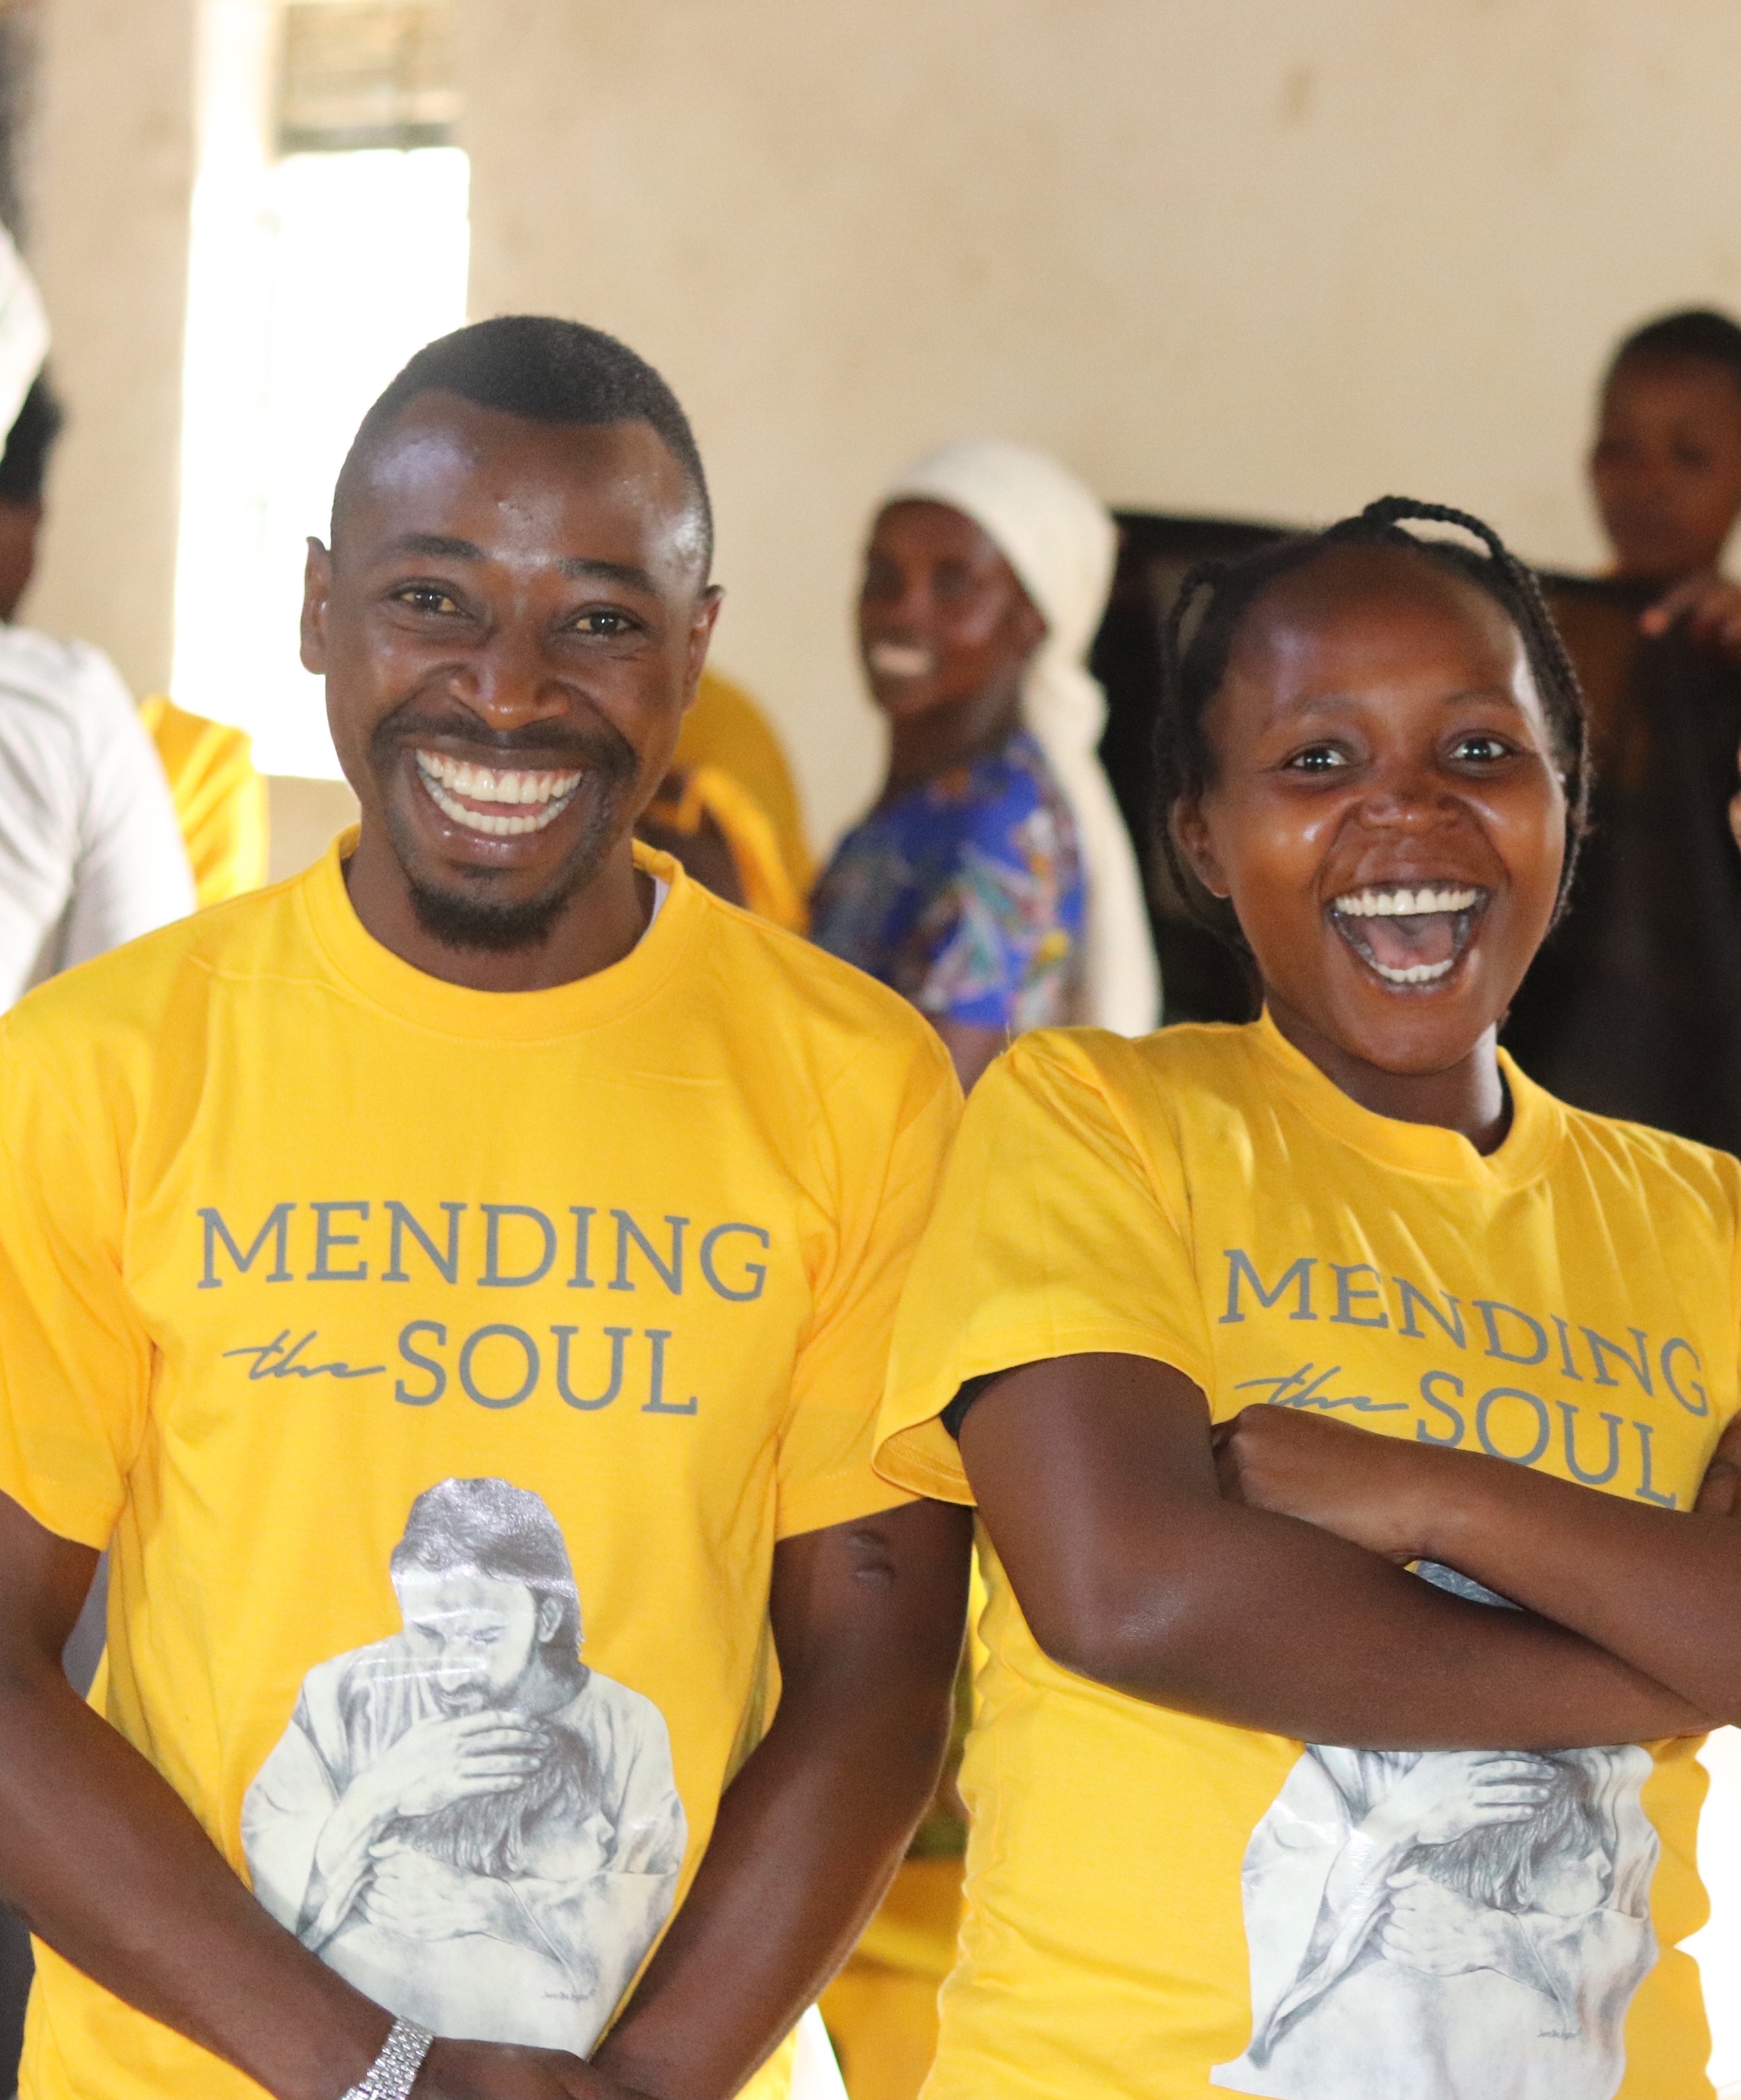 Participants pose for a photo wearing MTS t-shirts.JPG